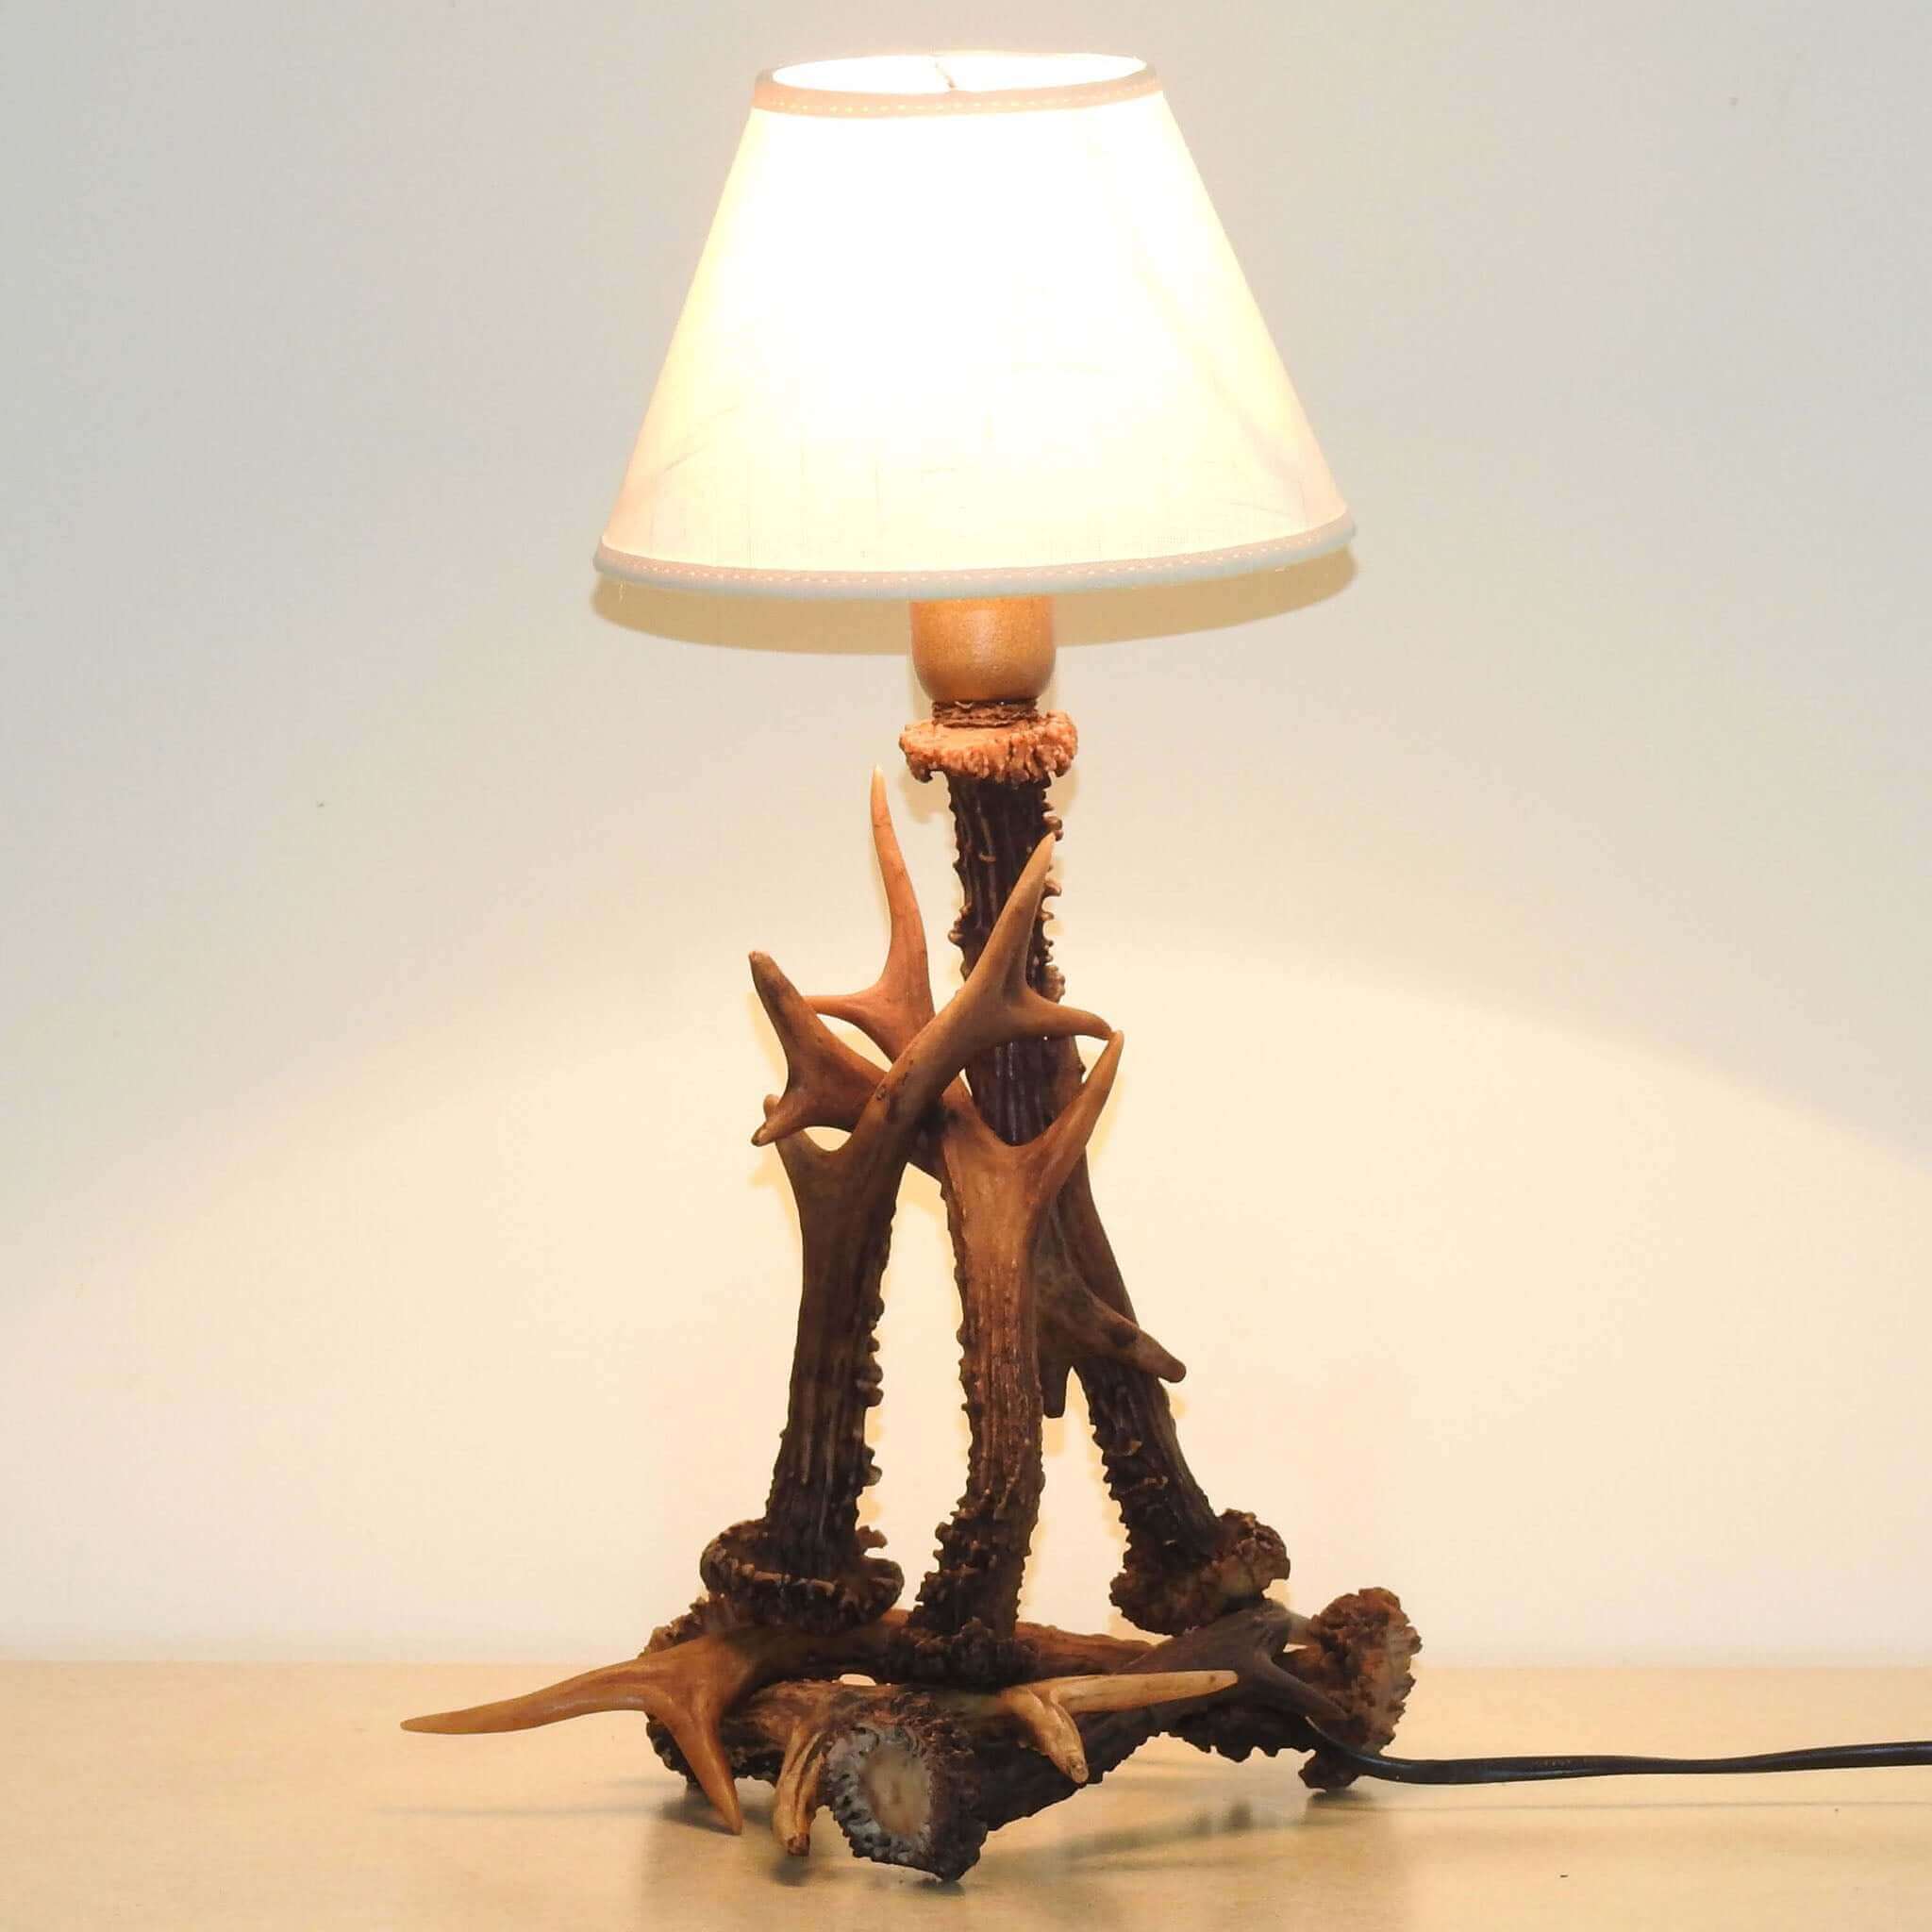 Real, small antler lamp.